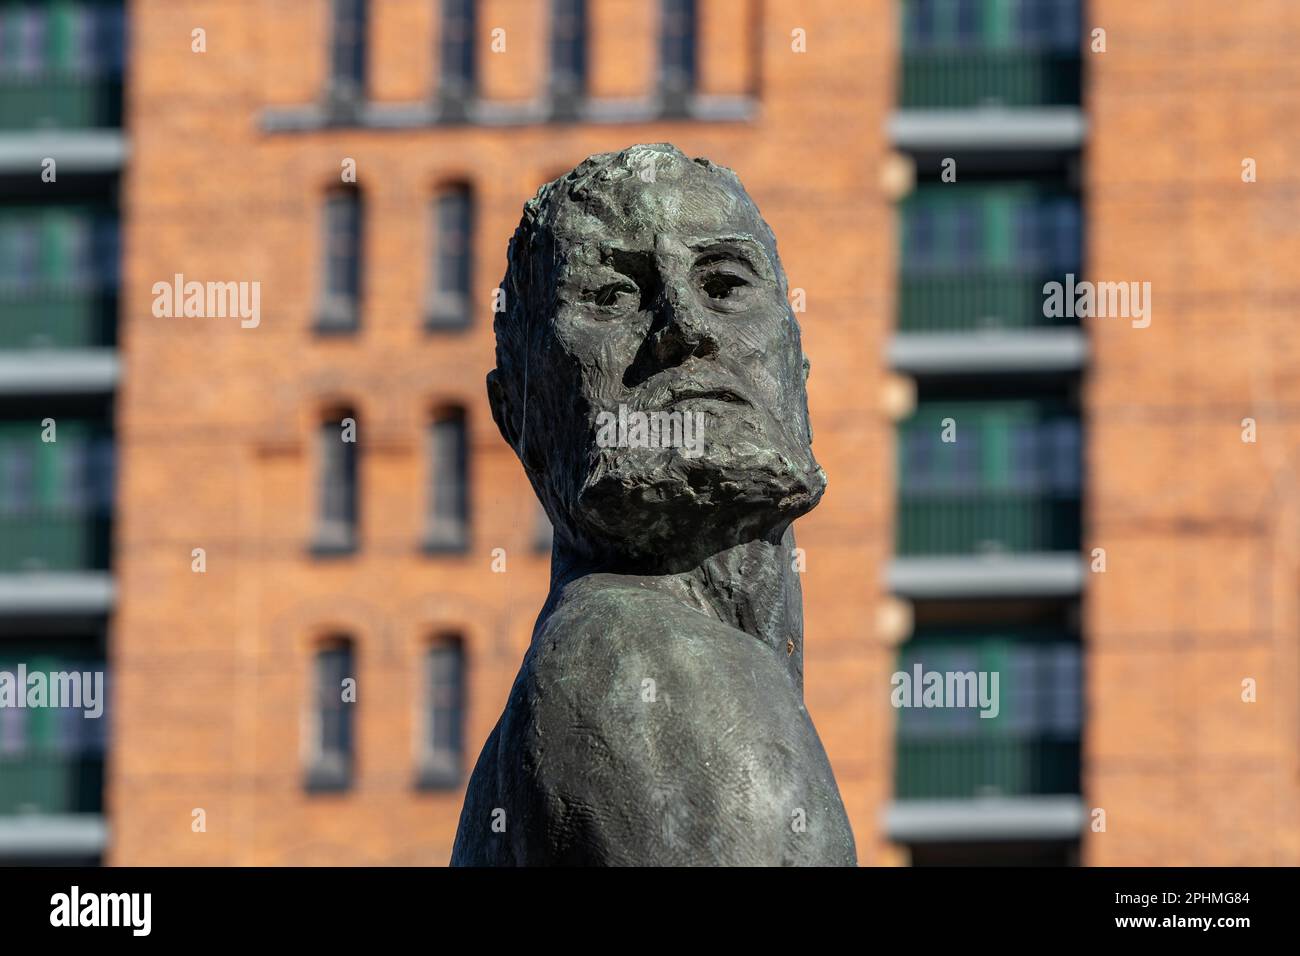 Hamburg, Germany, March 13, 2018 - Störtebeker monument captured in close-up against the backdrop of the Maritime Museum in Hamburg's HafenCity. Stock Photo